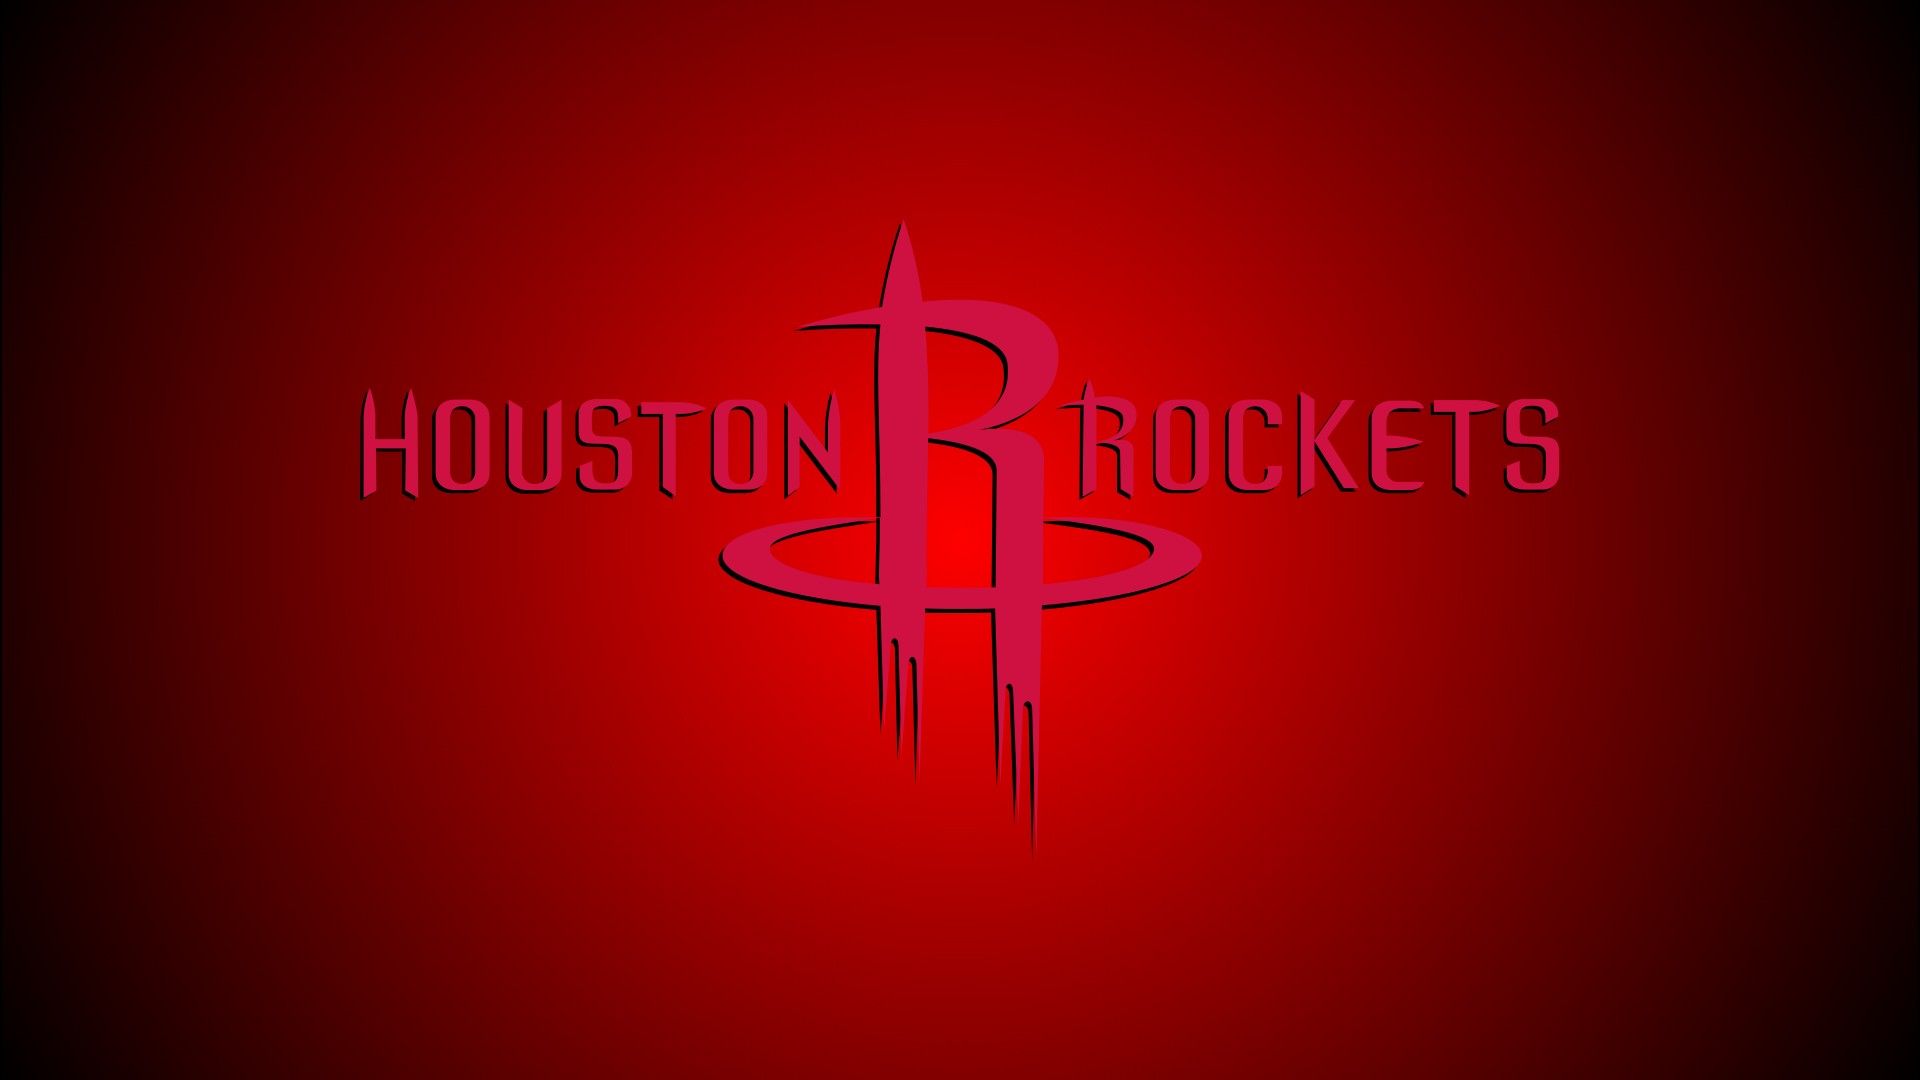 Rockets HD Wallpapers with image dimensions 1920x1080 pixel. You can make this wallpaper for your Desktop Computer Backgrounds, Windows or Mac Screensavers, iPhone Lock screen, Tablet or Android and another Mobile Phone device